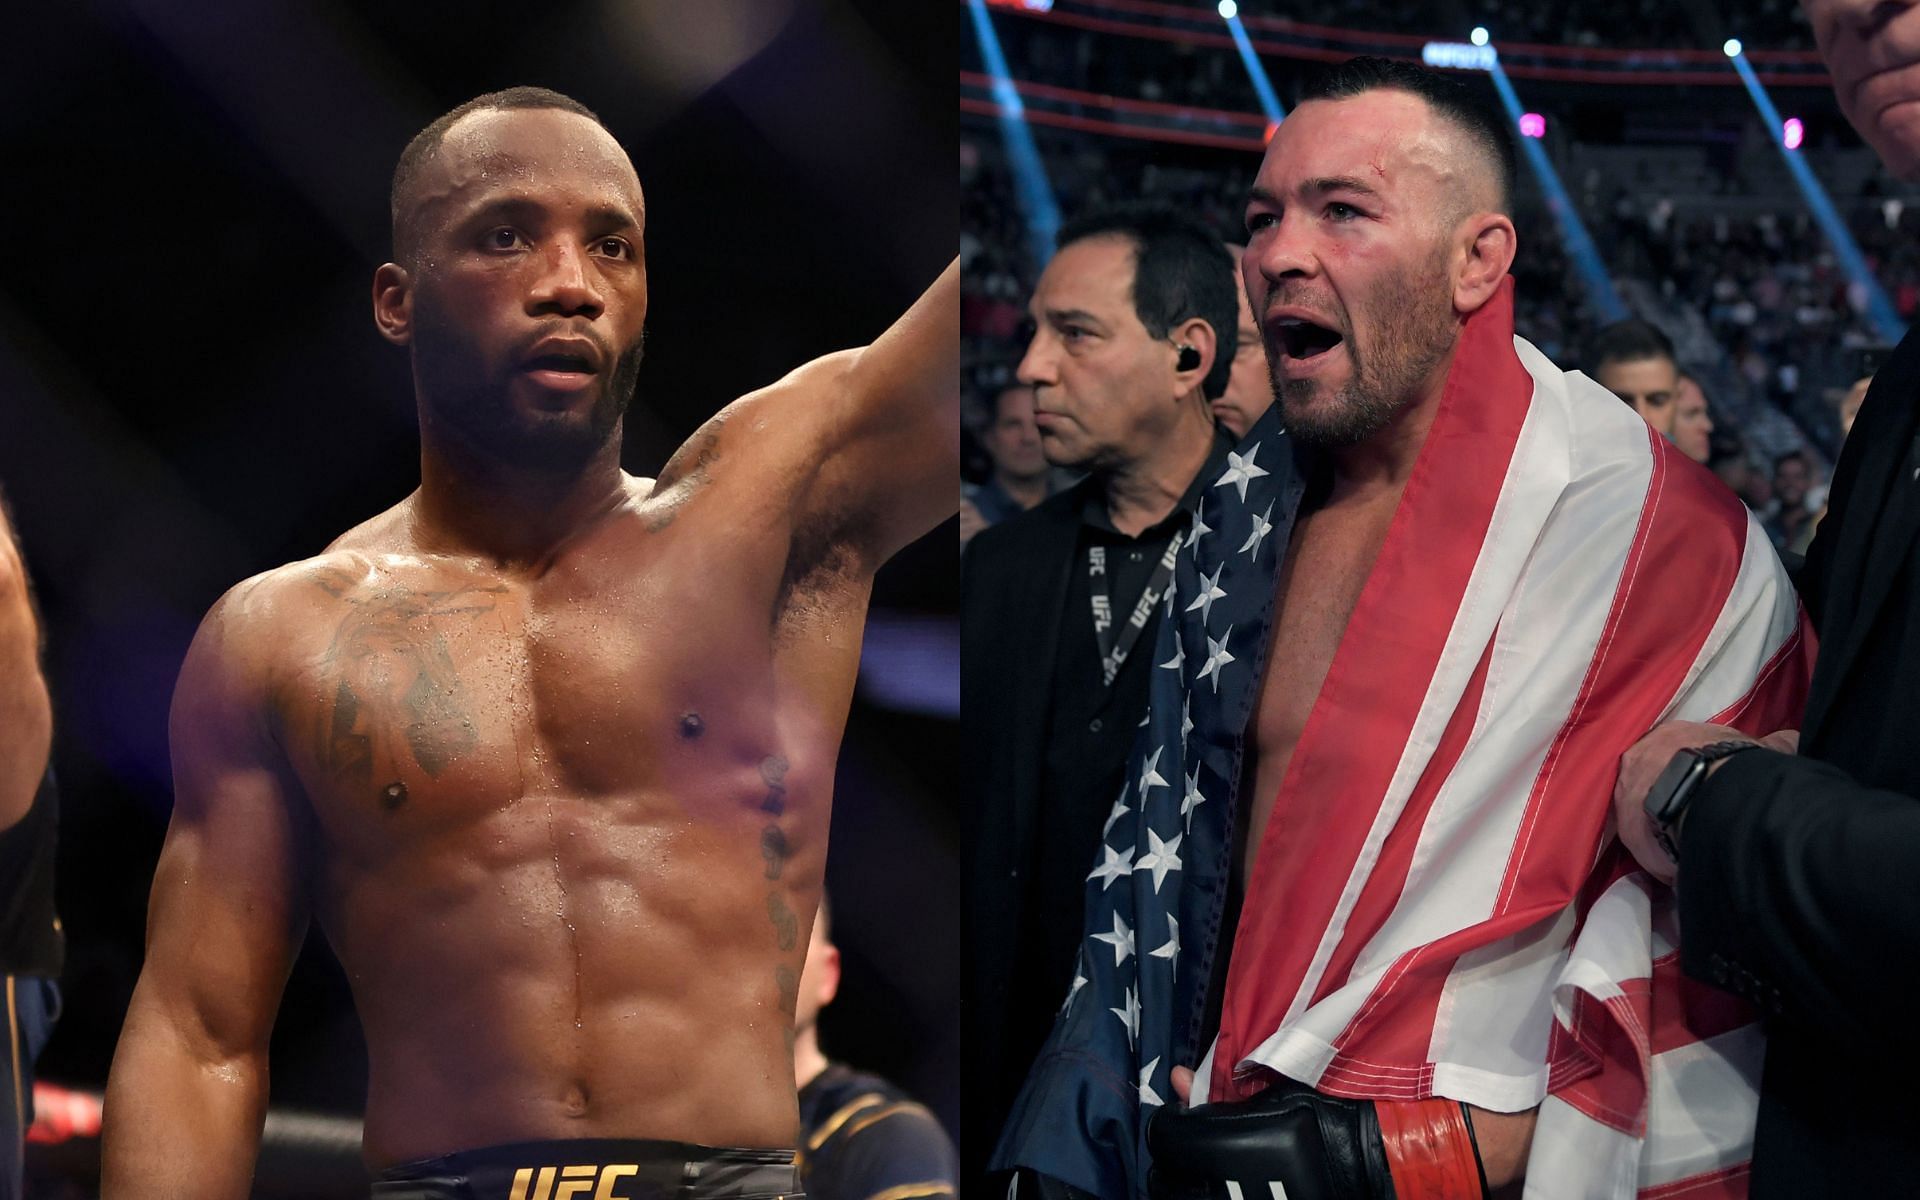 Leon Edwards (left) will face Colby Covington (right) in the main event of UFC 296 [Images courtesy: Getty Images]